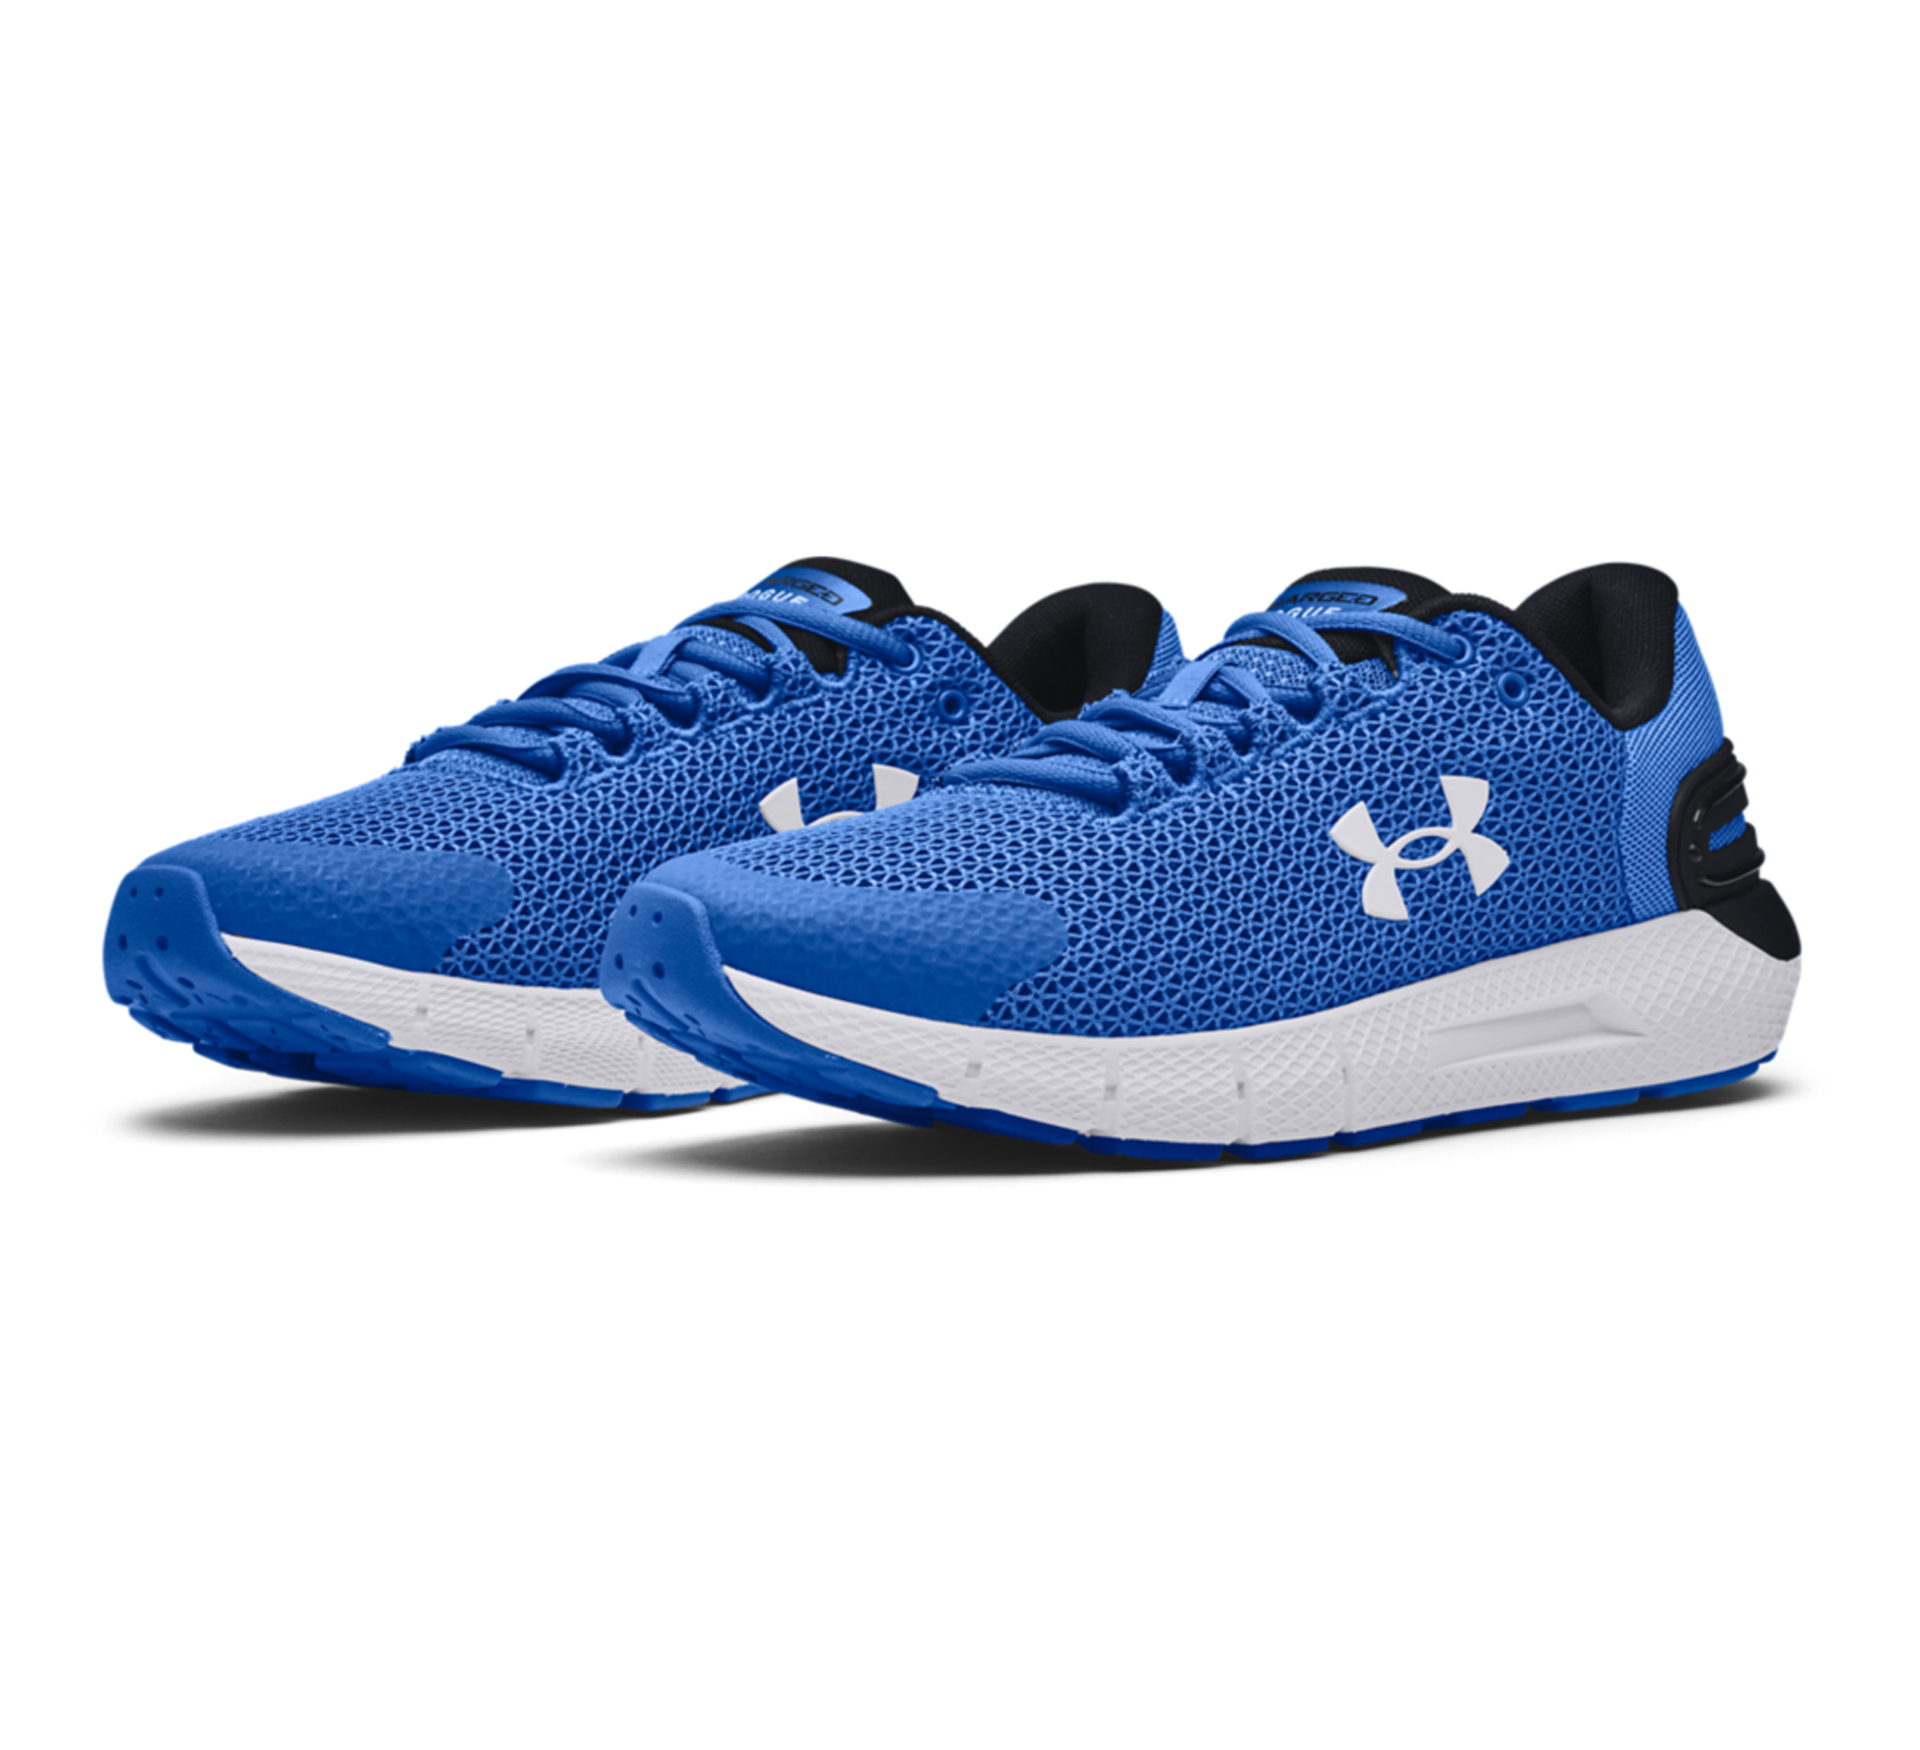 Under Armour Charged Rogue 2.5 Chaussure de running Hommes